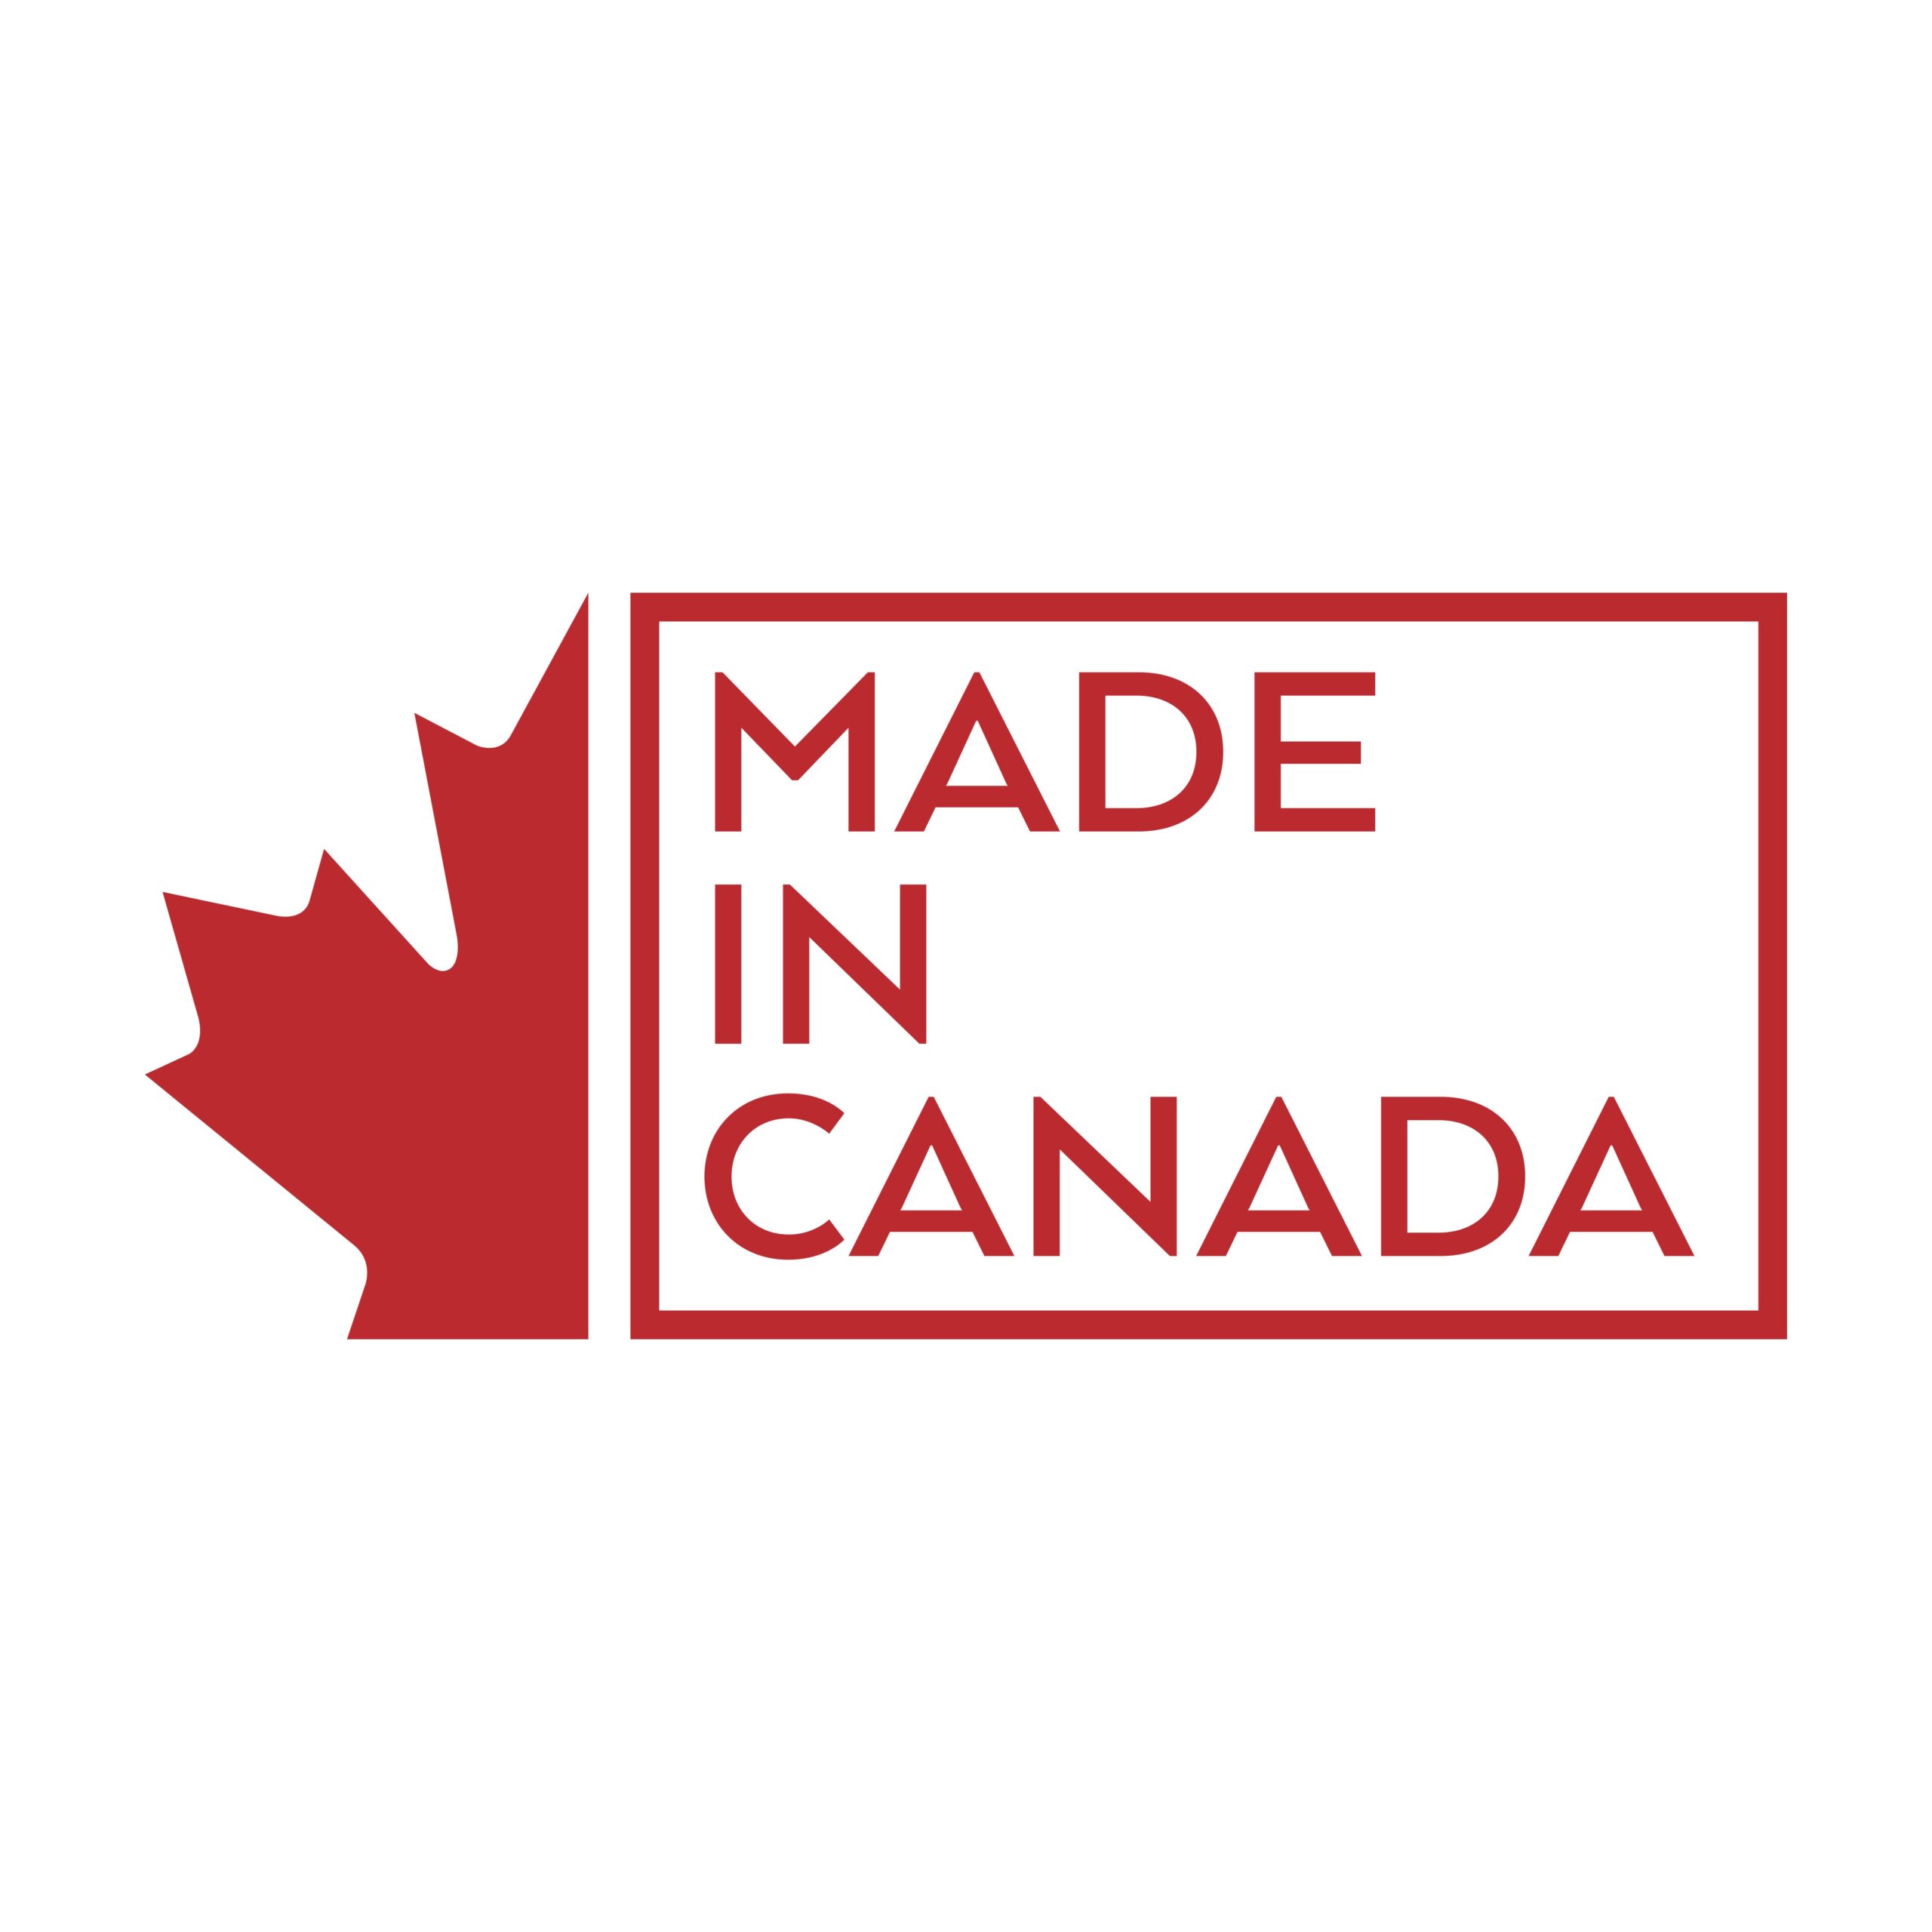 made in canada image